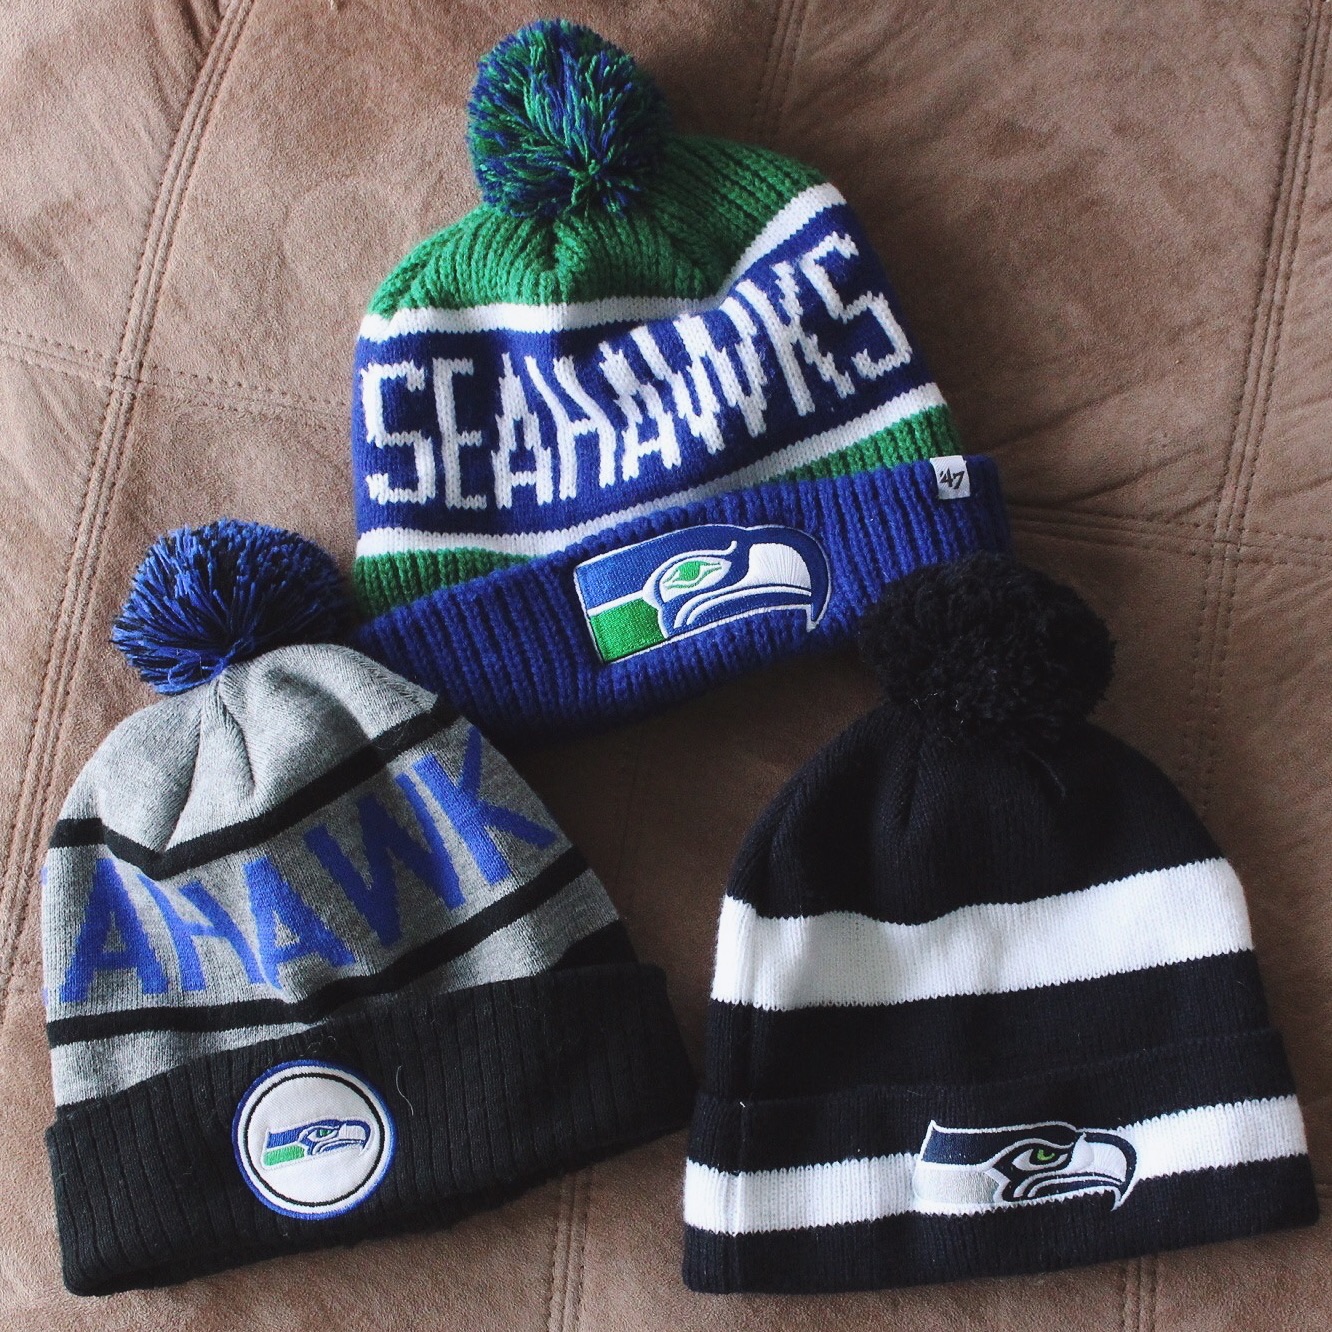 7 Pro Tips For Attending Your First Seahawks Game at CenturyLink Field